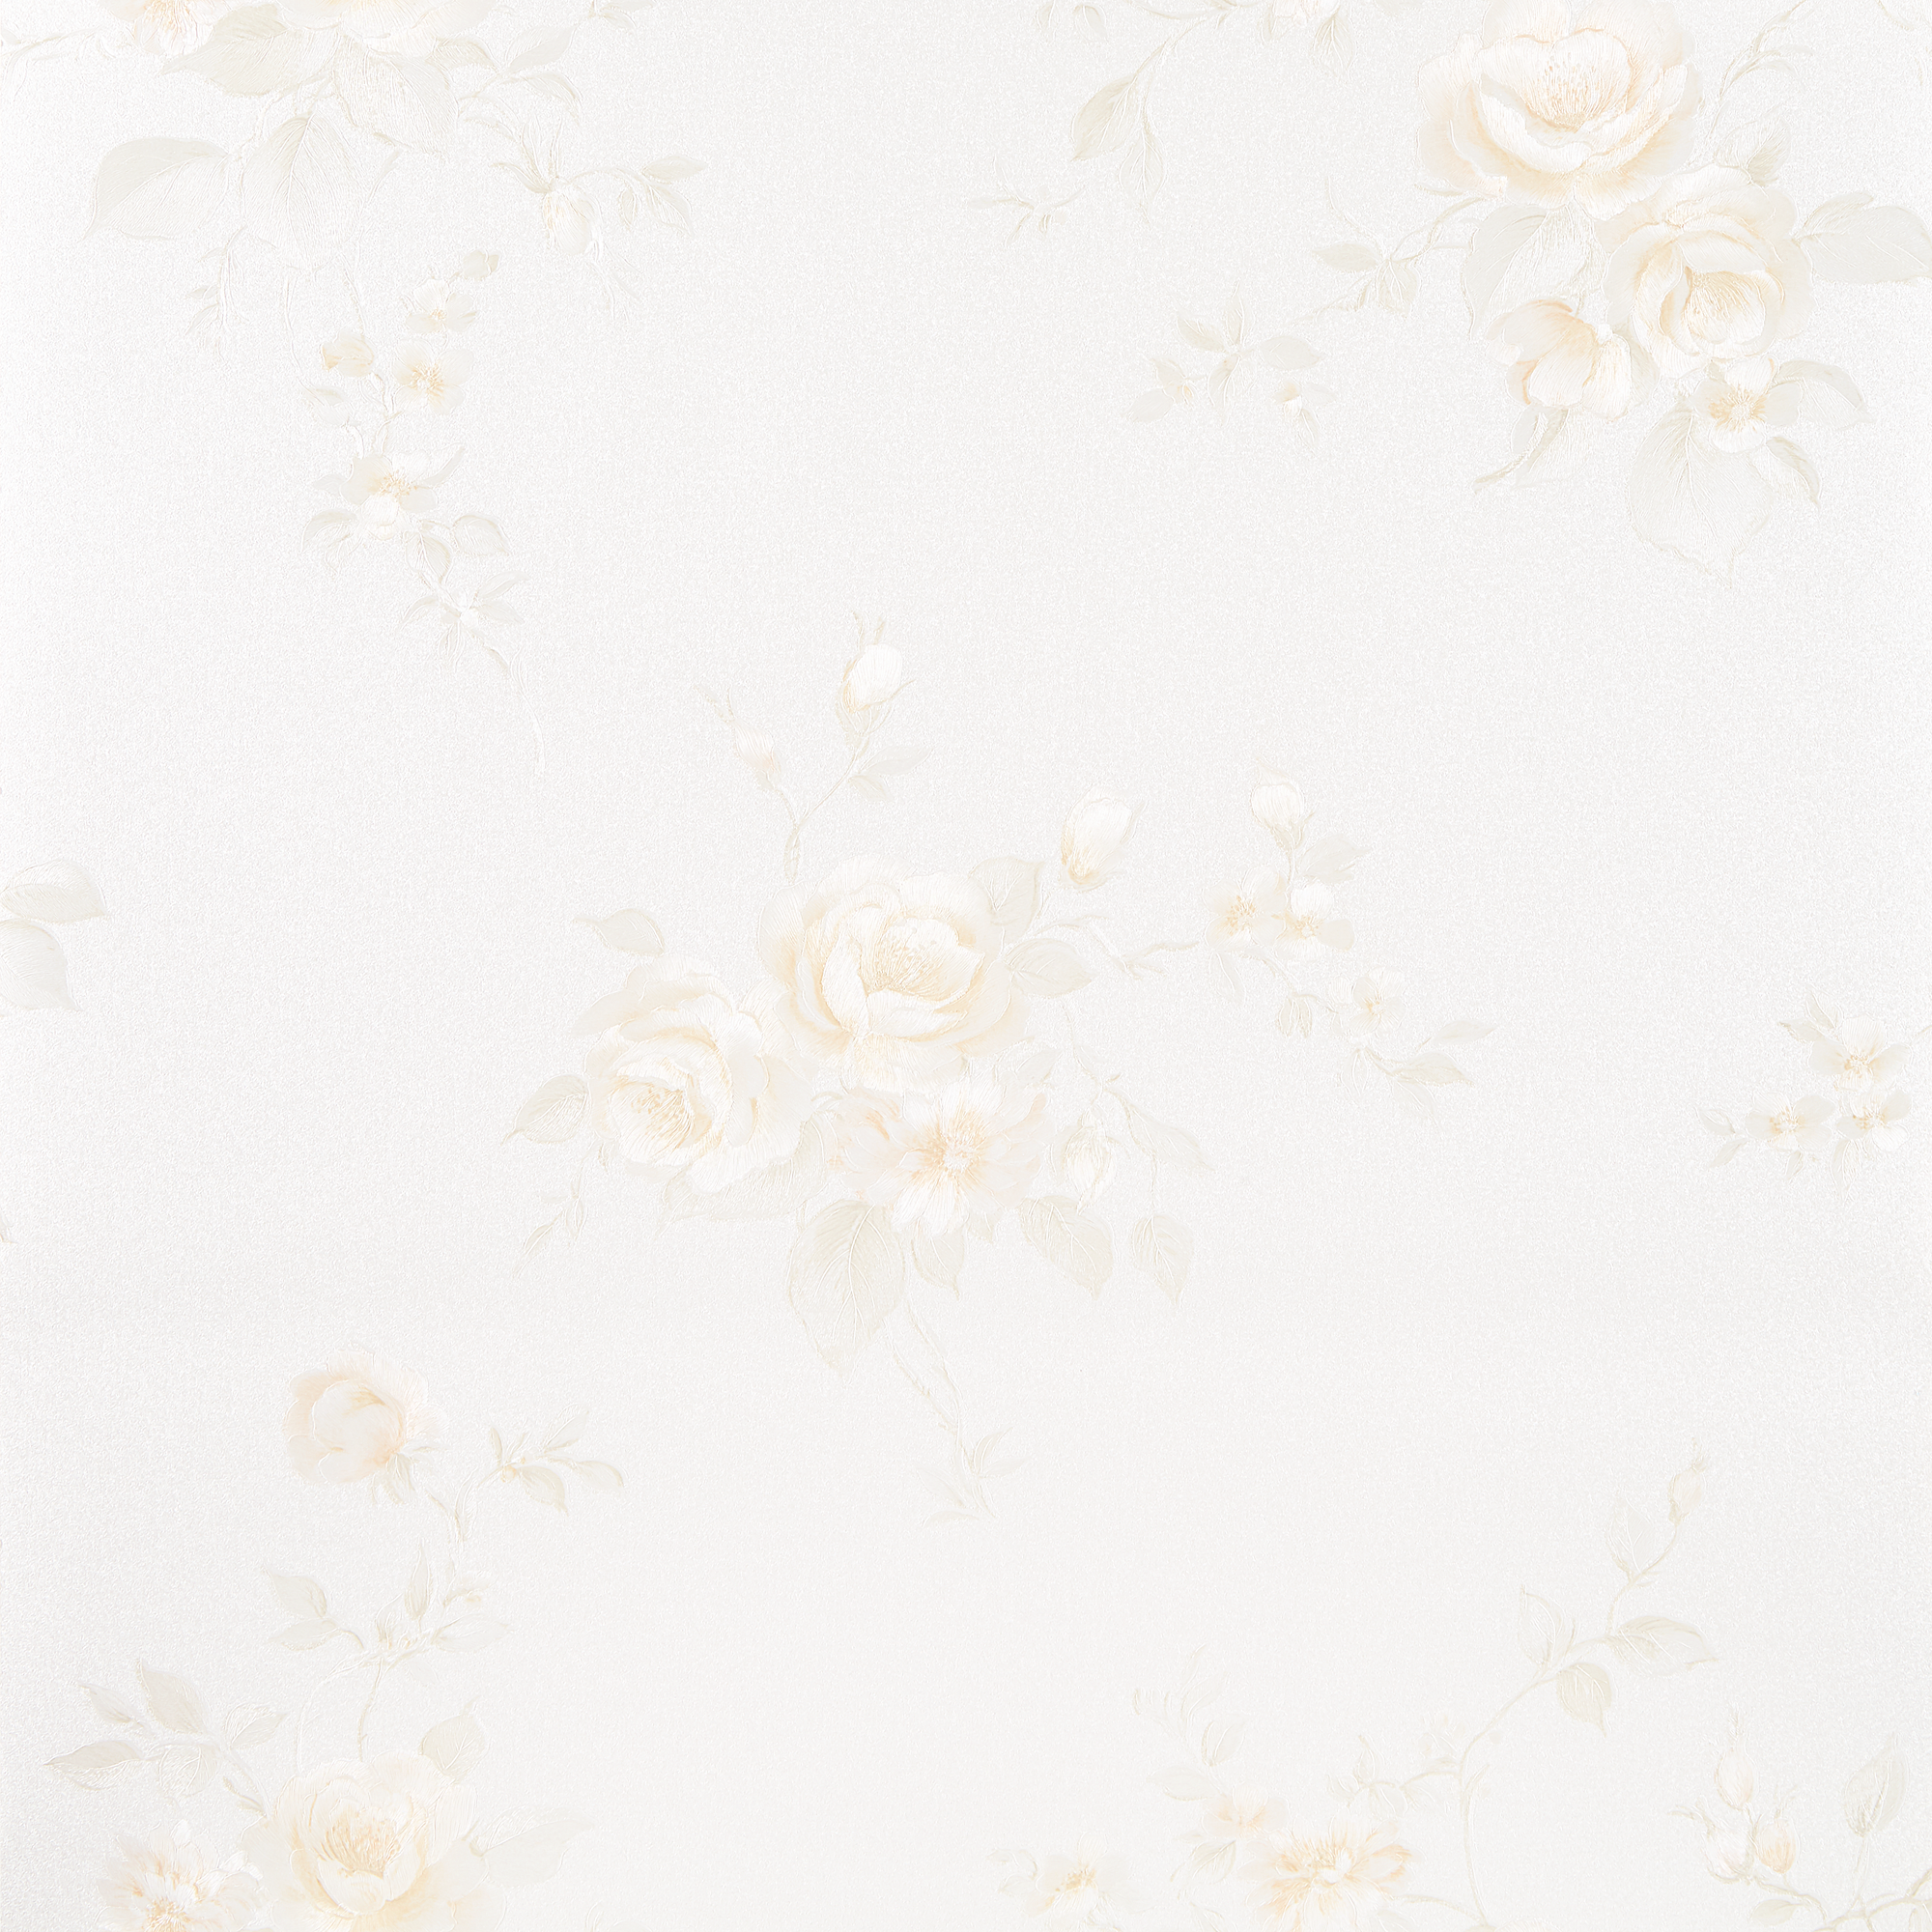 Satintapete "Exklusives Wohnen" Floral beige 10,05 x 0,53 m + product picture